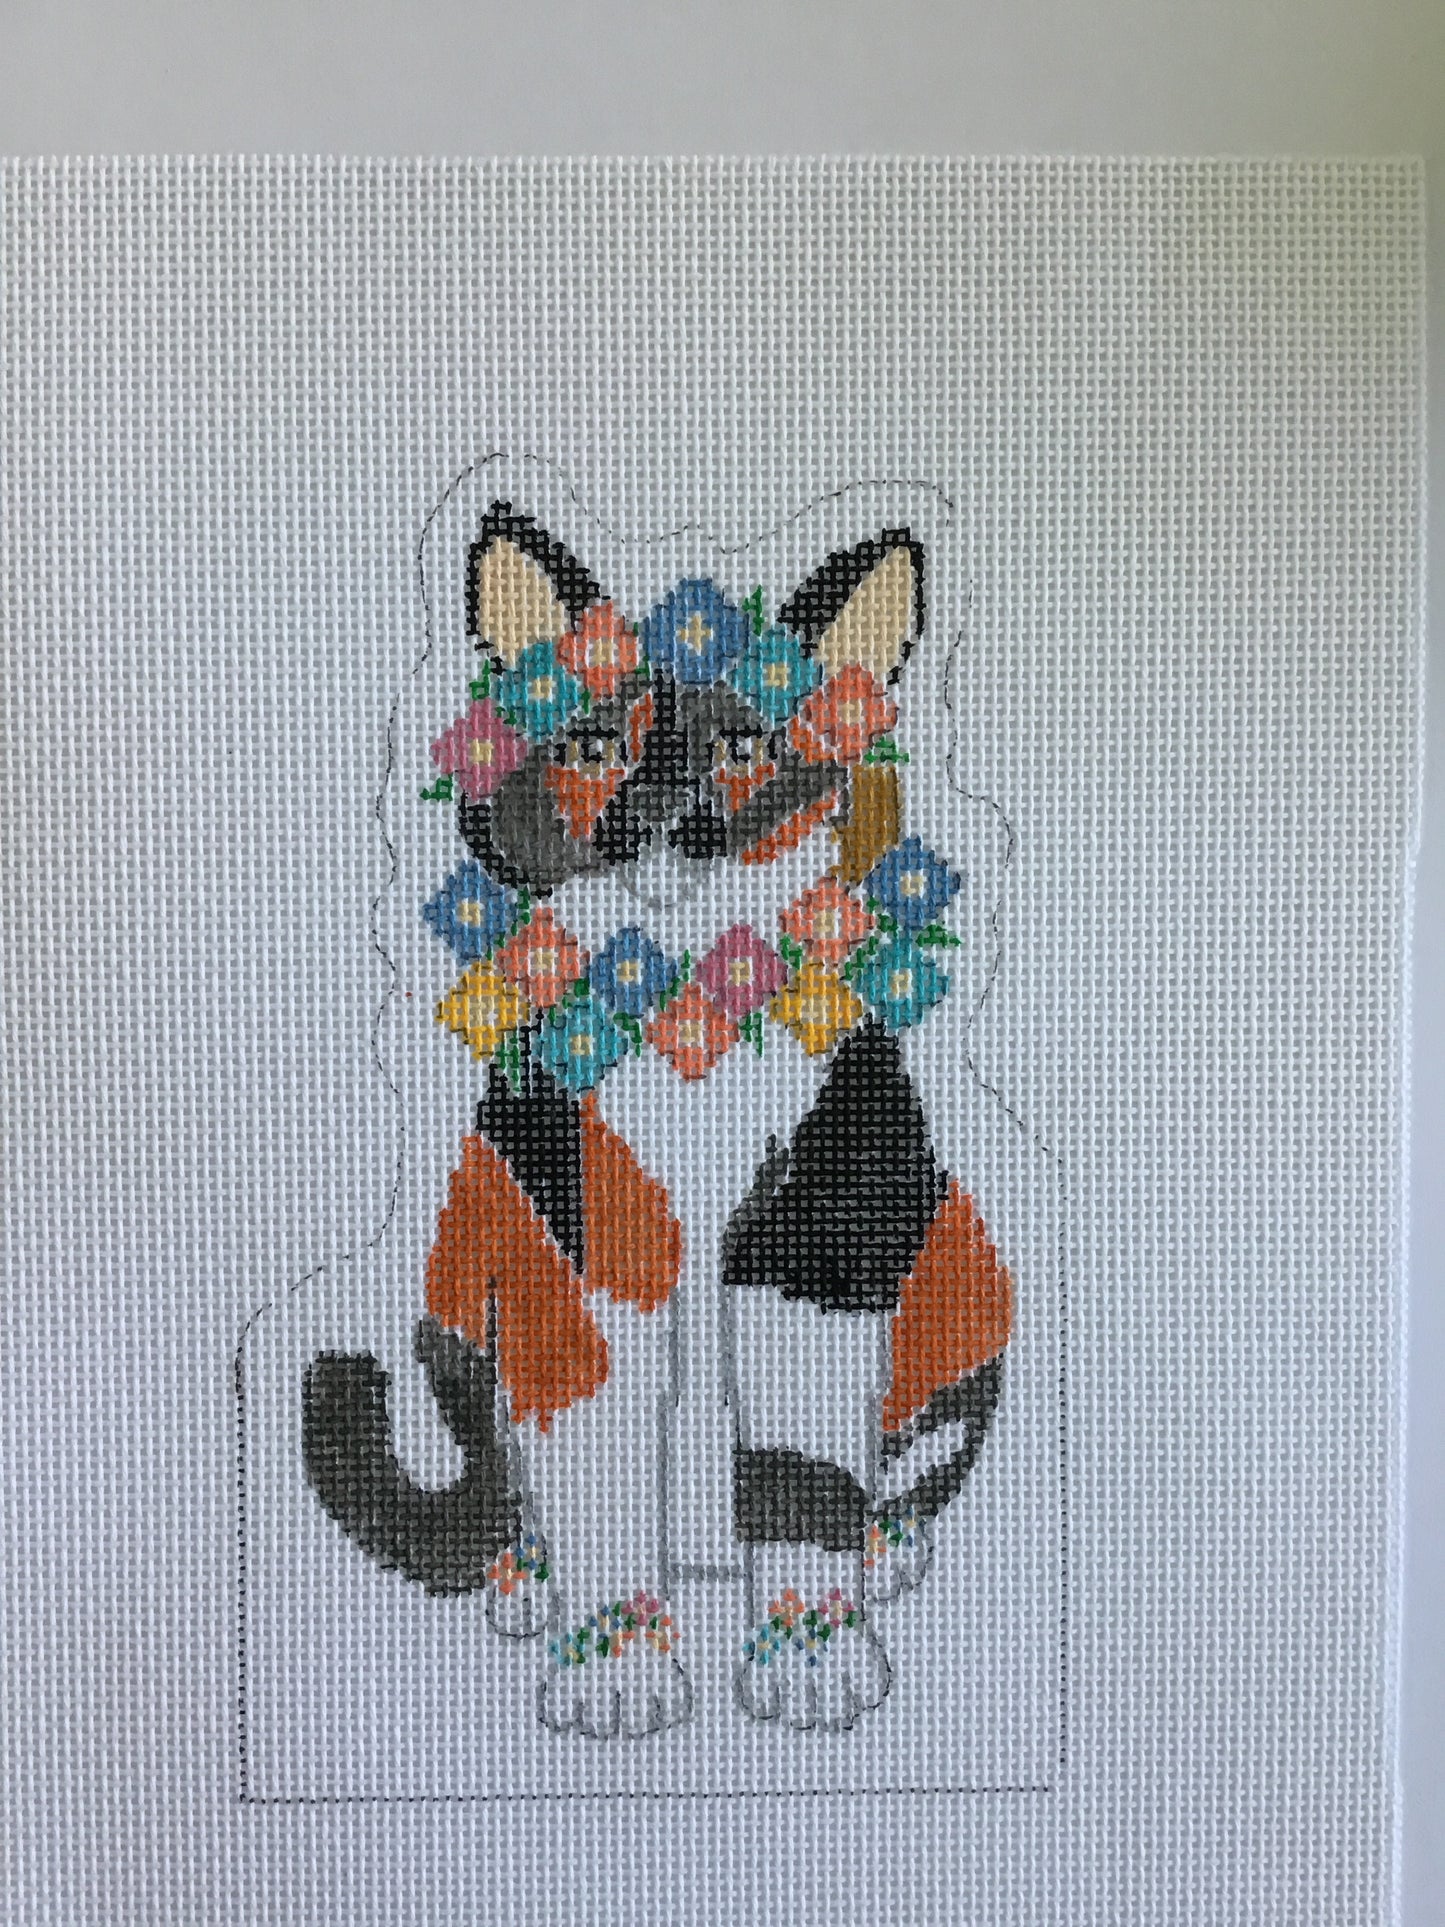 #5 May cat Sugar  with stitch guide